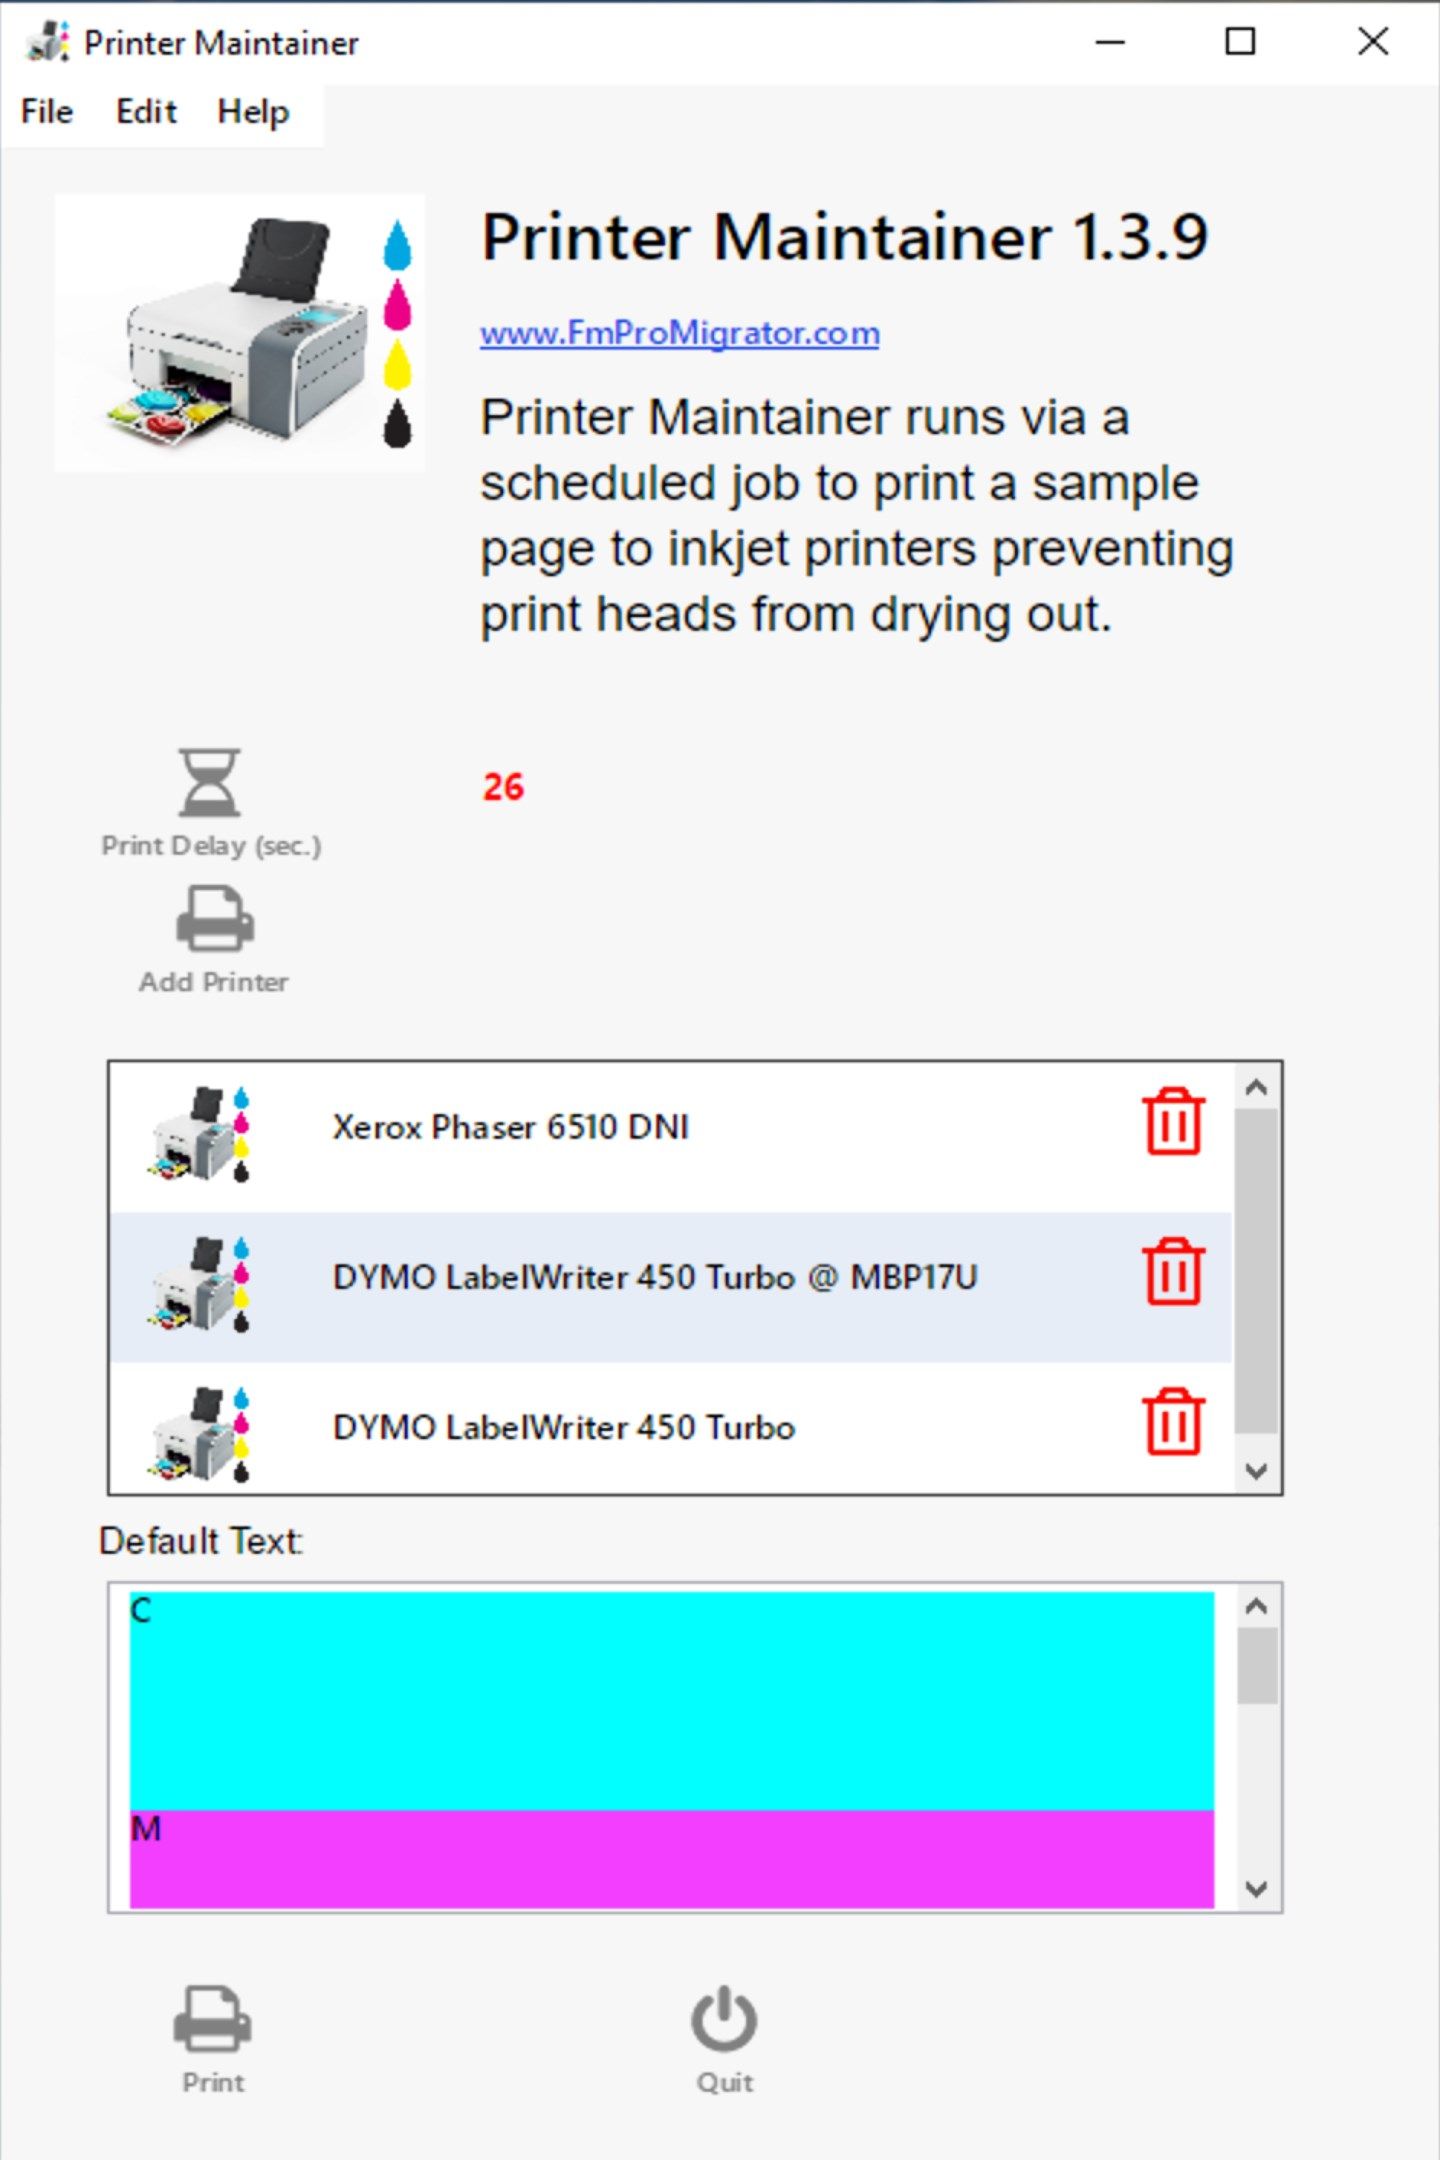 Printer Maintainer - Opened, with Countdown Timer Running.